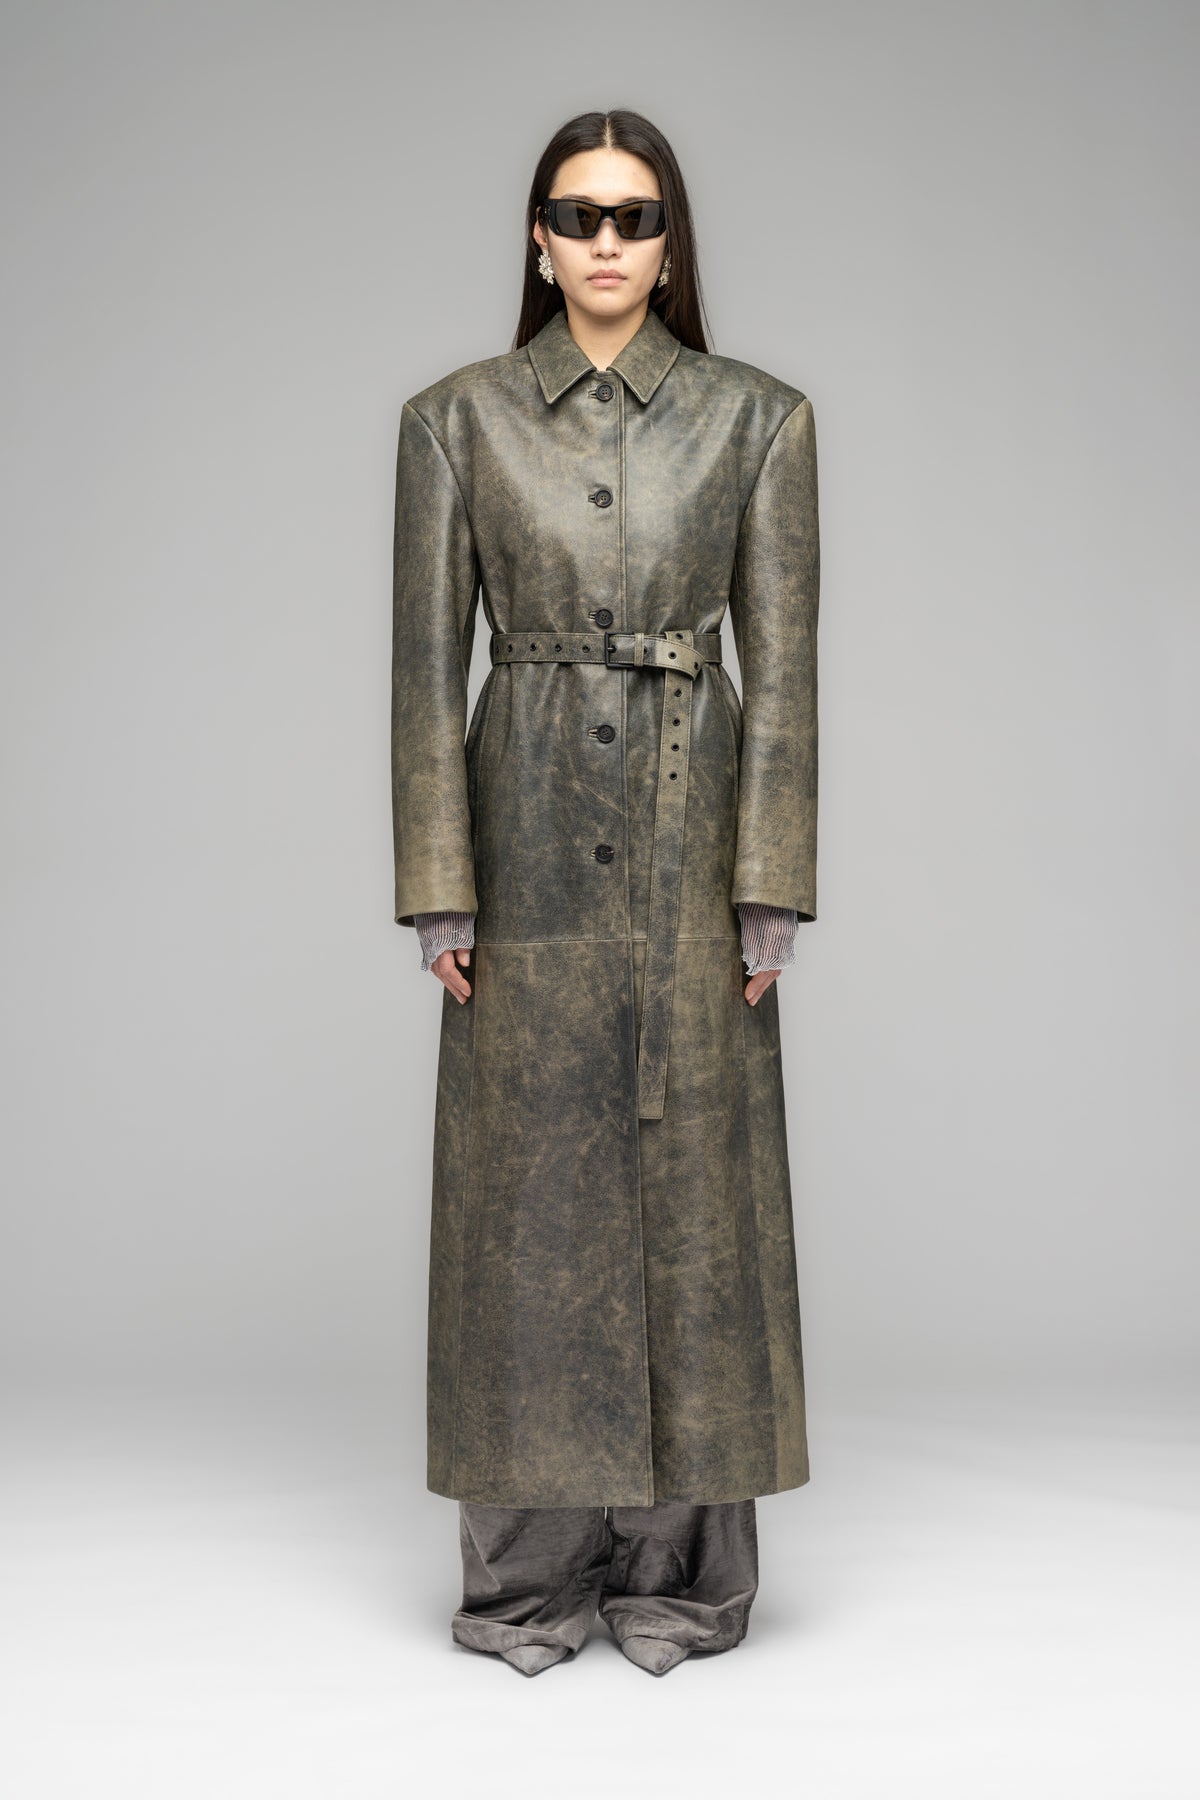 "STONECUTTER" EXTRA LONG LEATHER COAT